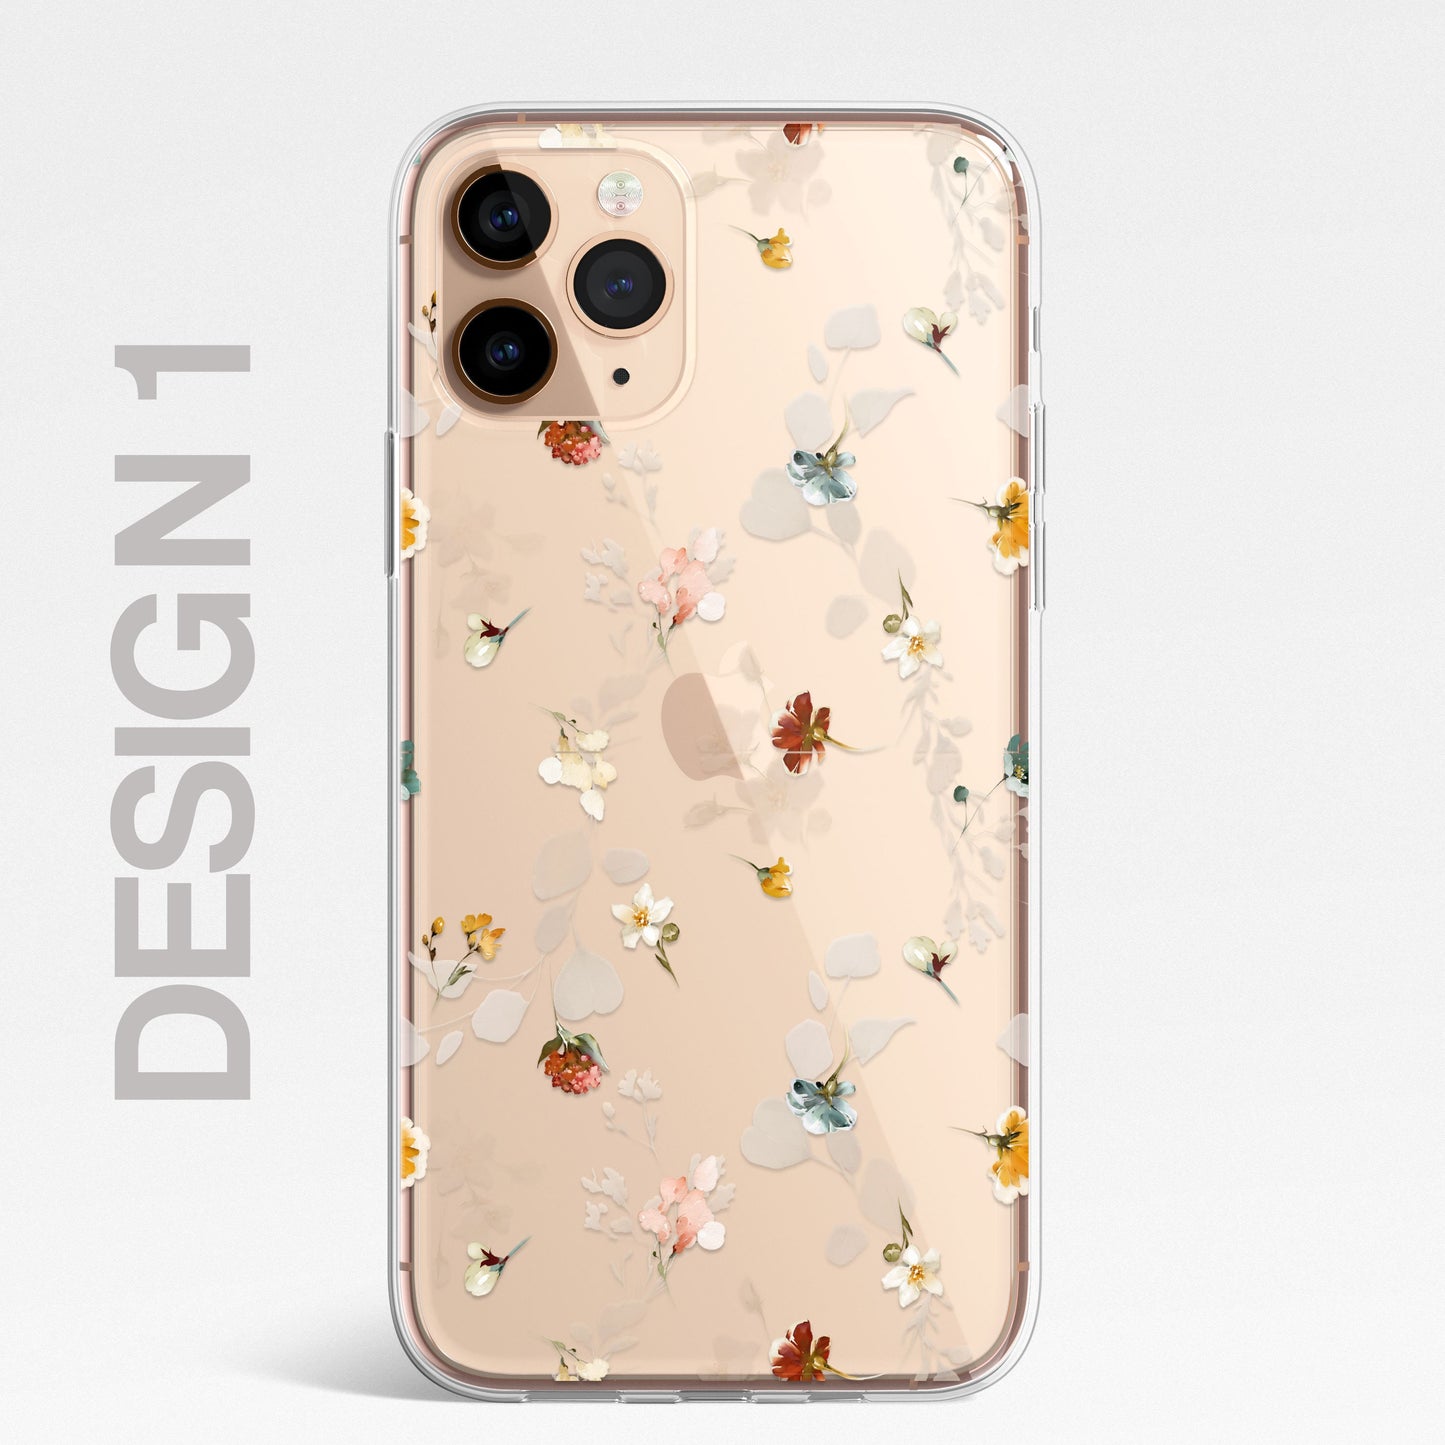 Personalised Floral iPhone Custom Silicone CLEAR Phone Case Cover Flowers English Roses Gold iPhone 11 XS XR Max Plus Pro Samsung Galaxy